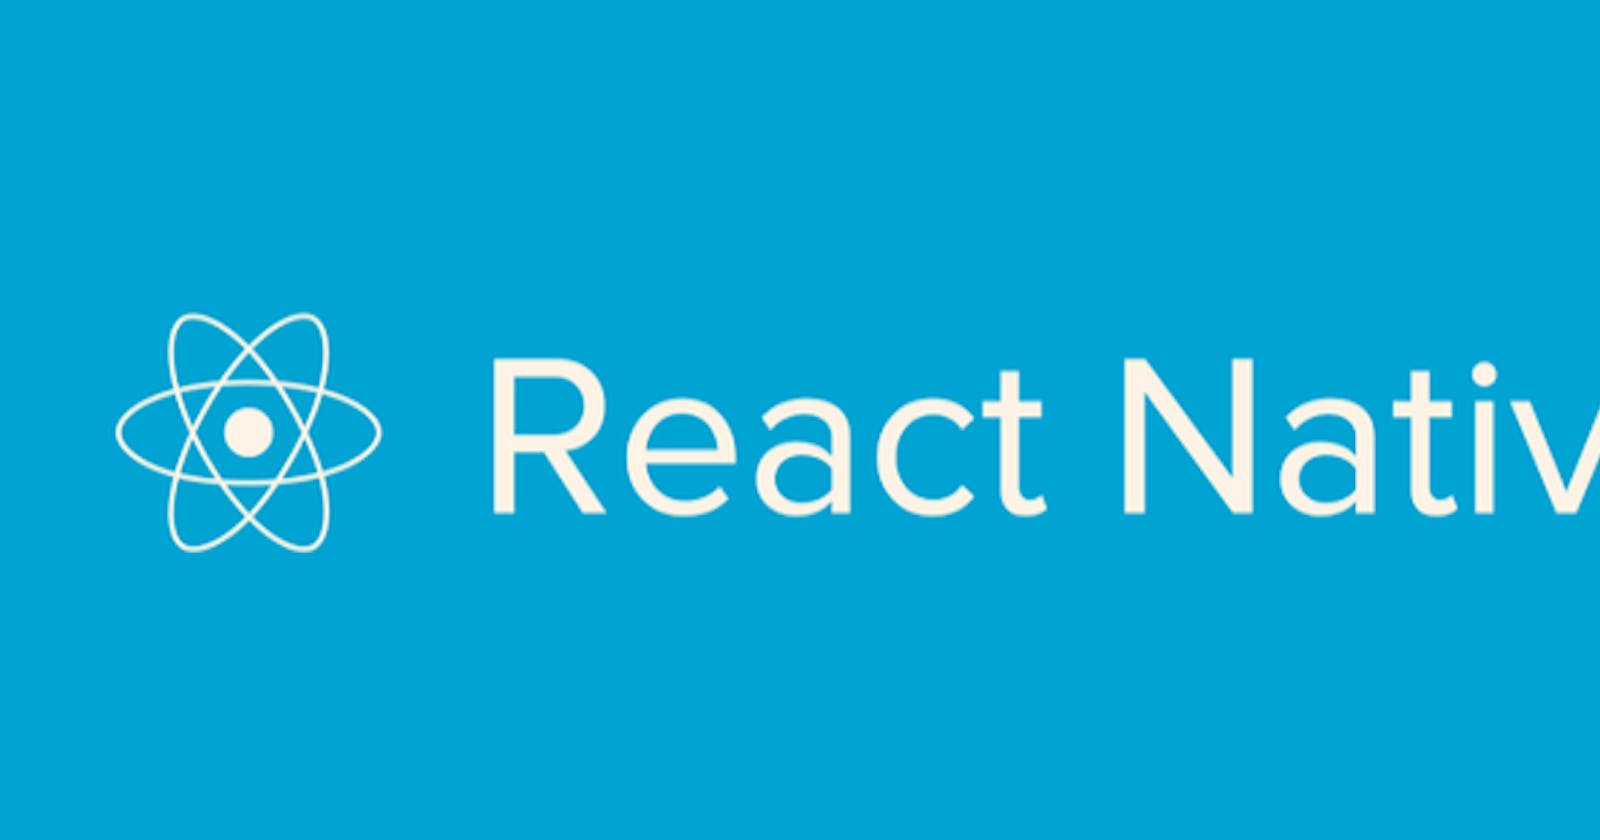 My week learning React Native